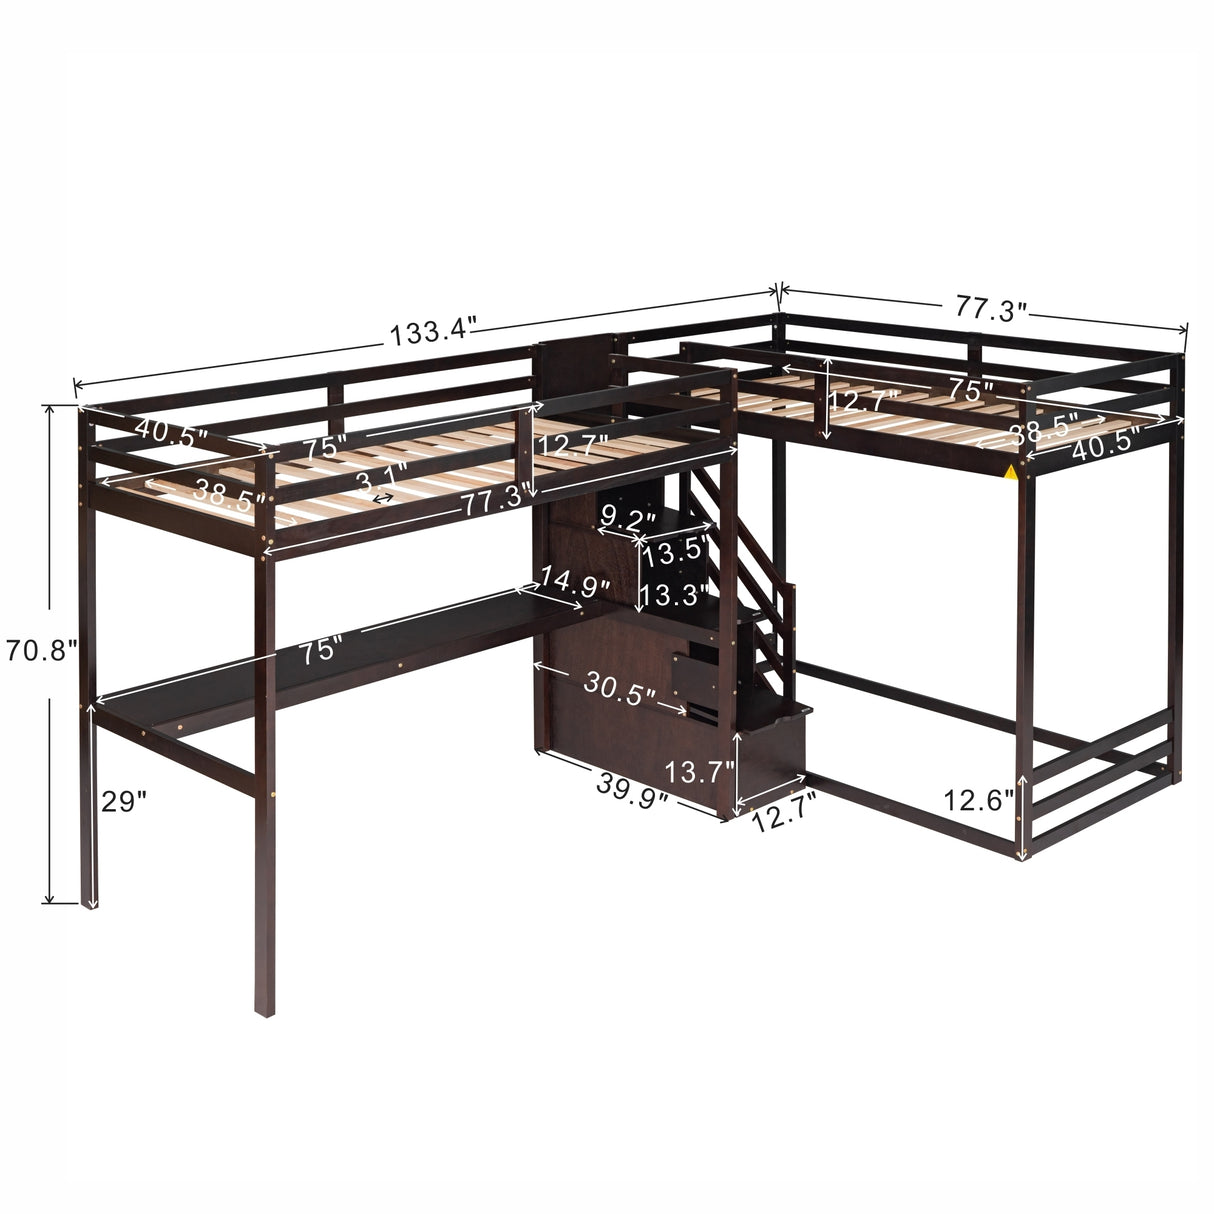 L-Shaped Twin Size Bunk Bed and Loft Bed with Built-in Middle Staircase and Desk,Espresso - Home Elegance USA